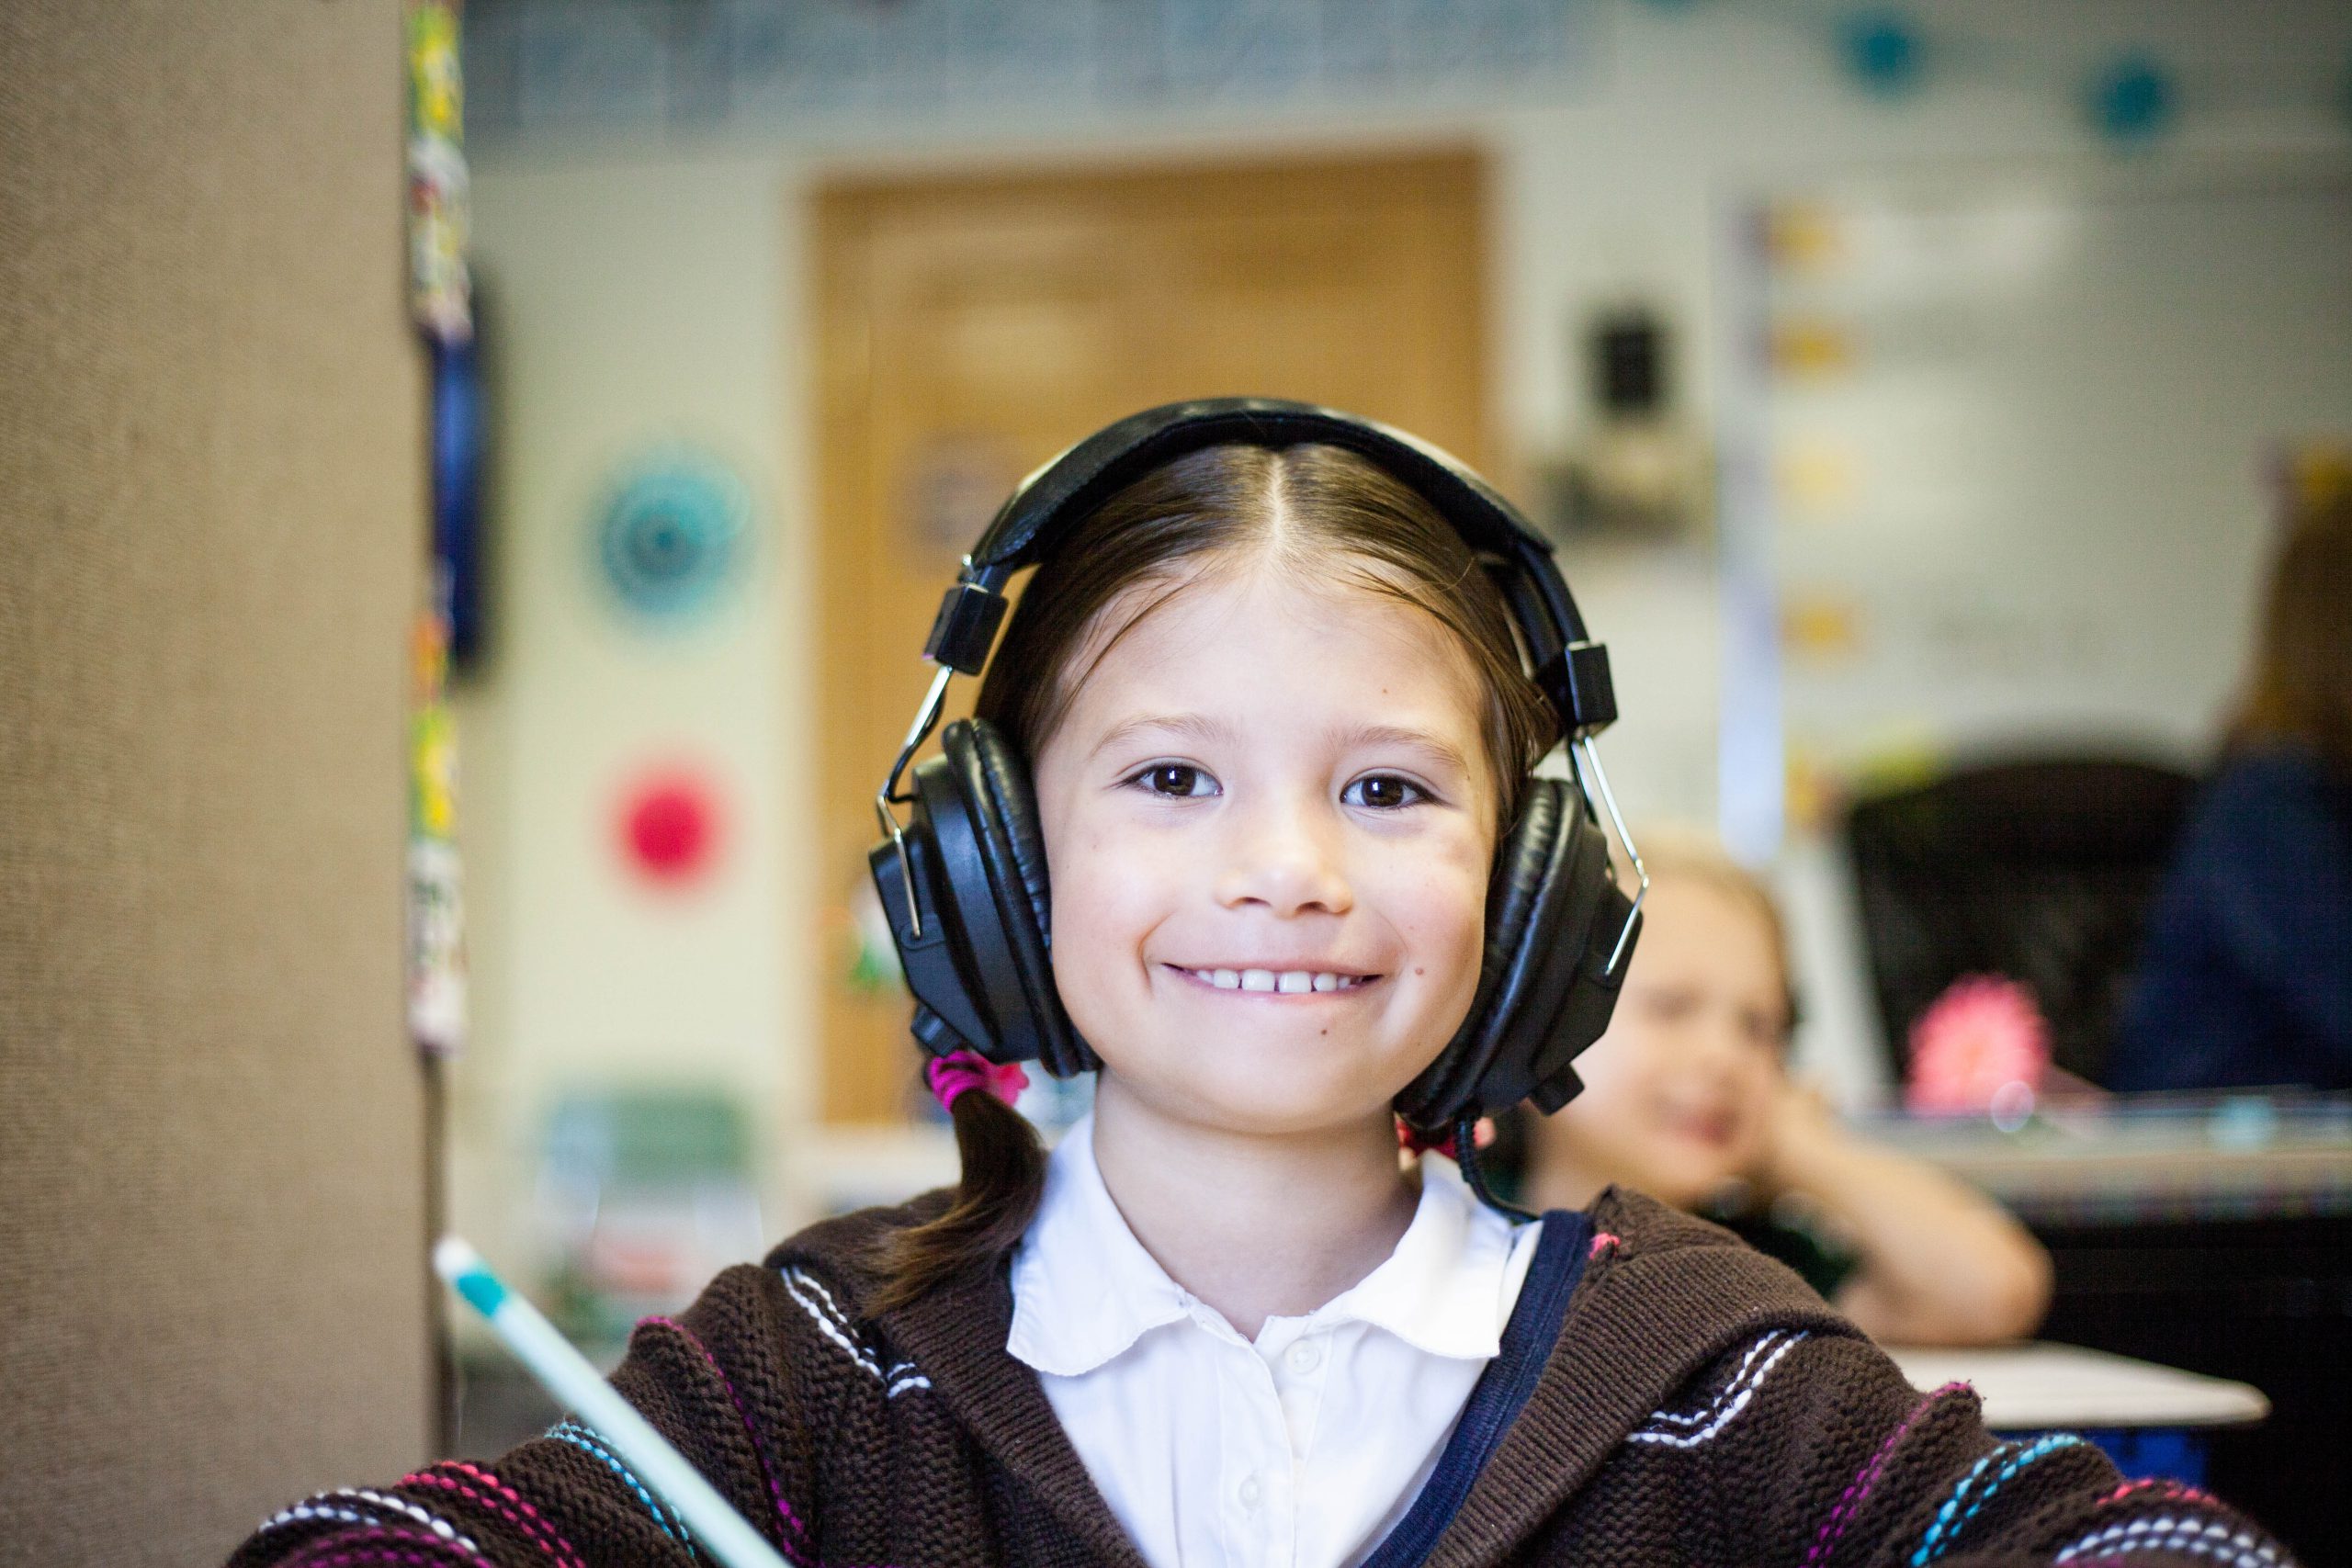 child with headphones smiling